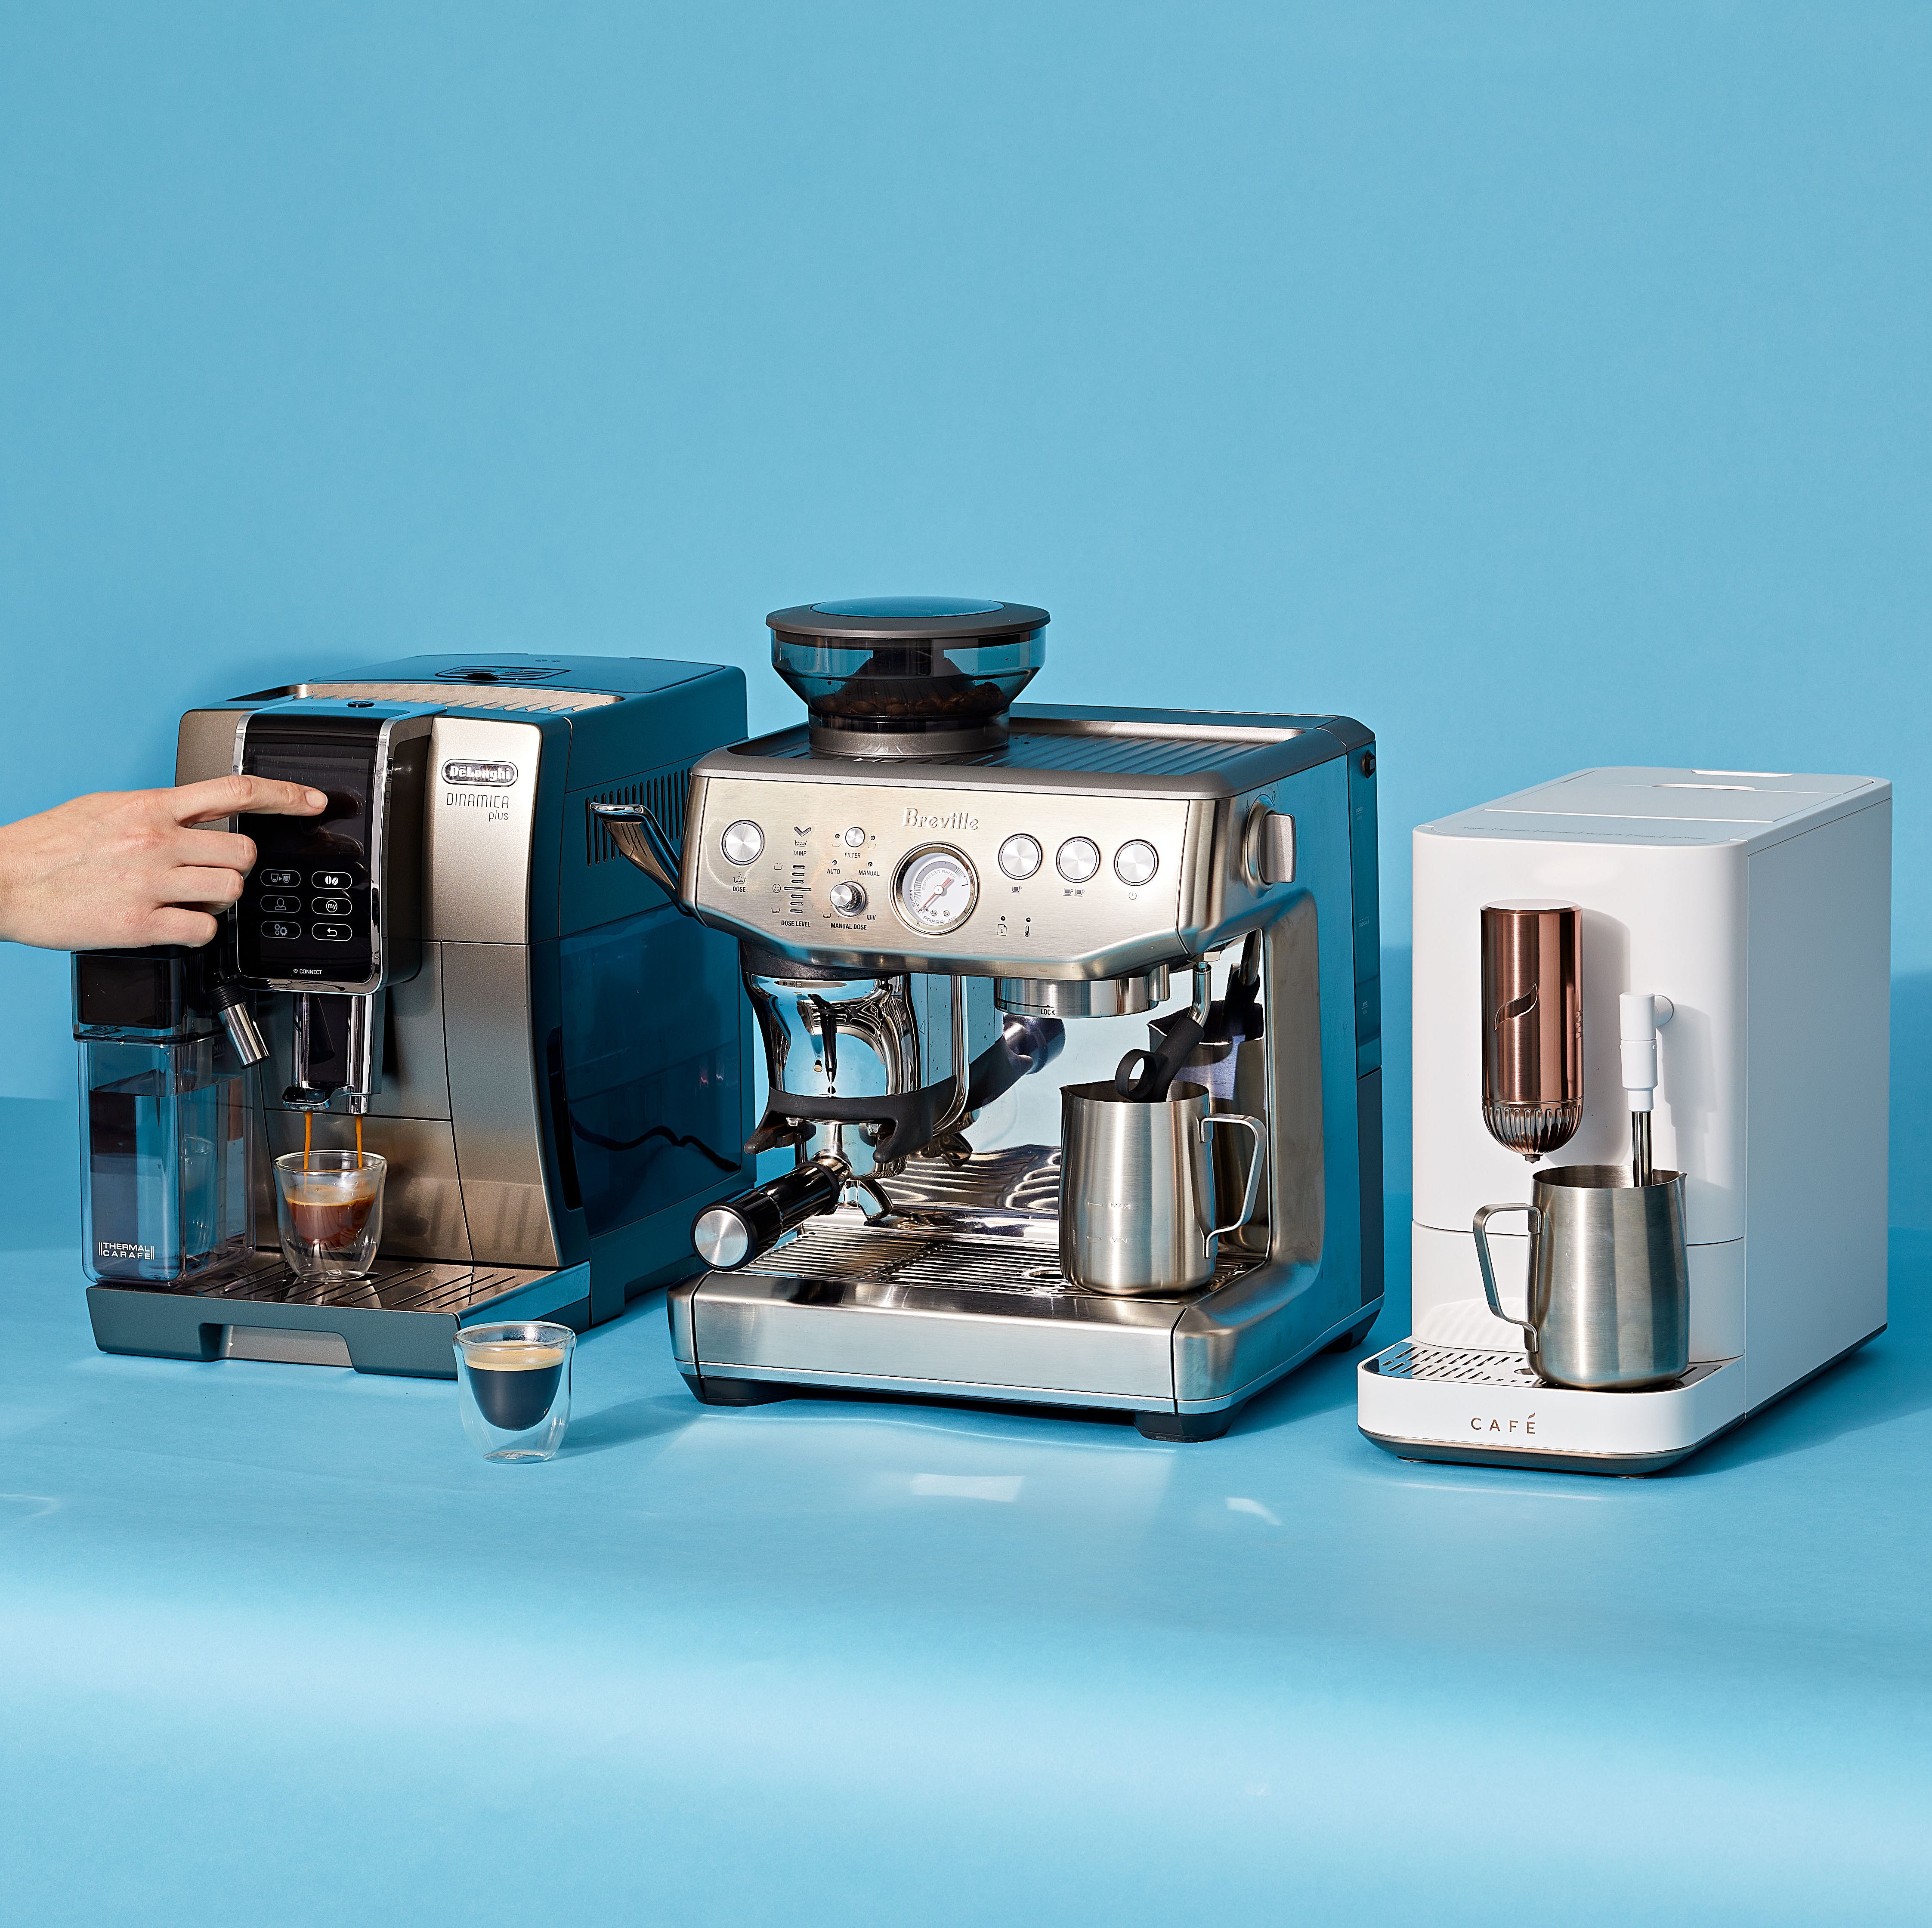 We Tested Over 35 Espresso Machines to Find the Best Ones for Your Home